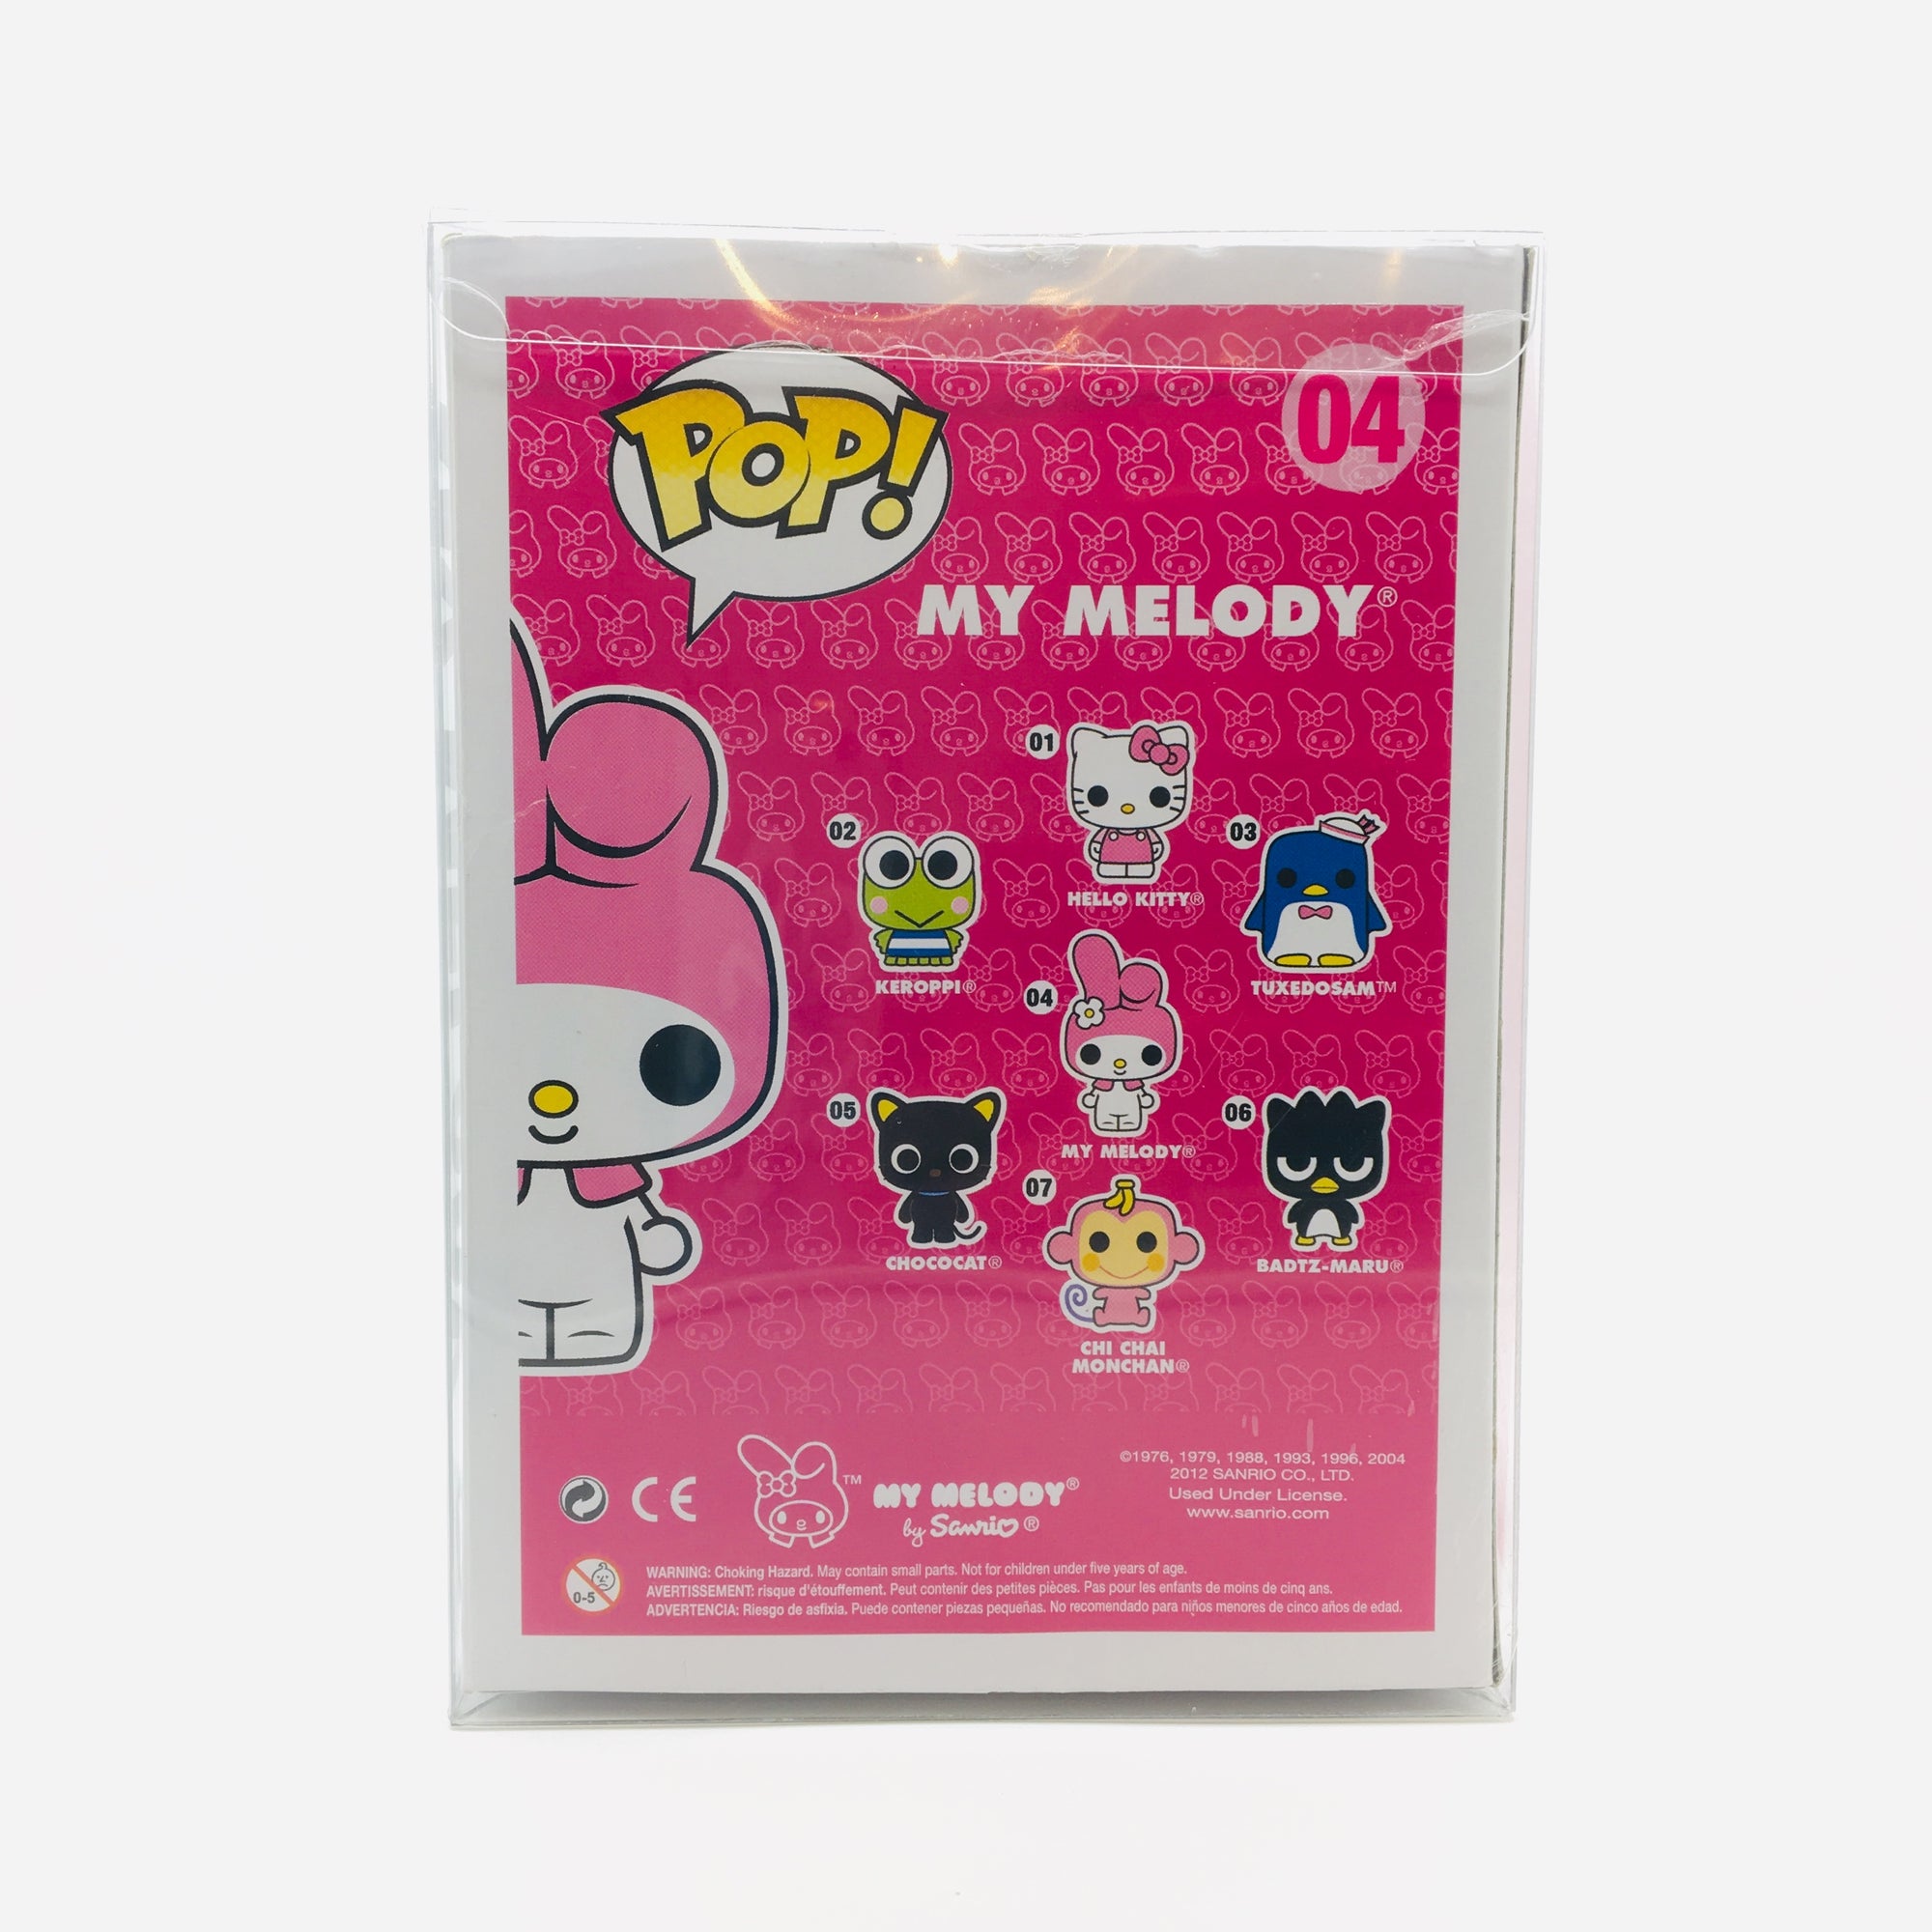 Sanrio My Melody Pop Toy Figure #04 Vaulted by Funko